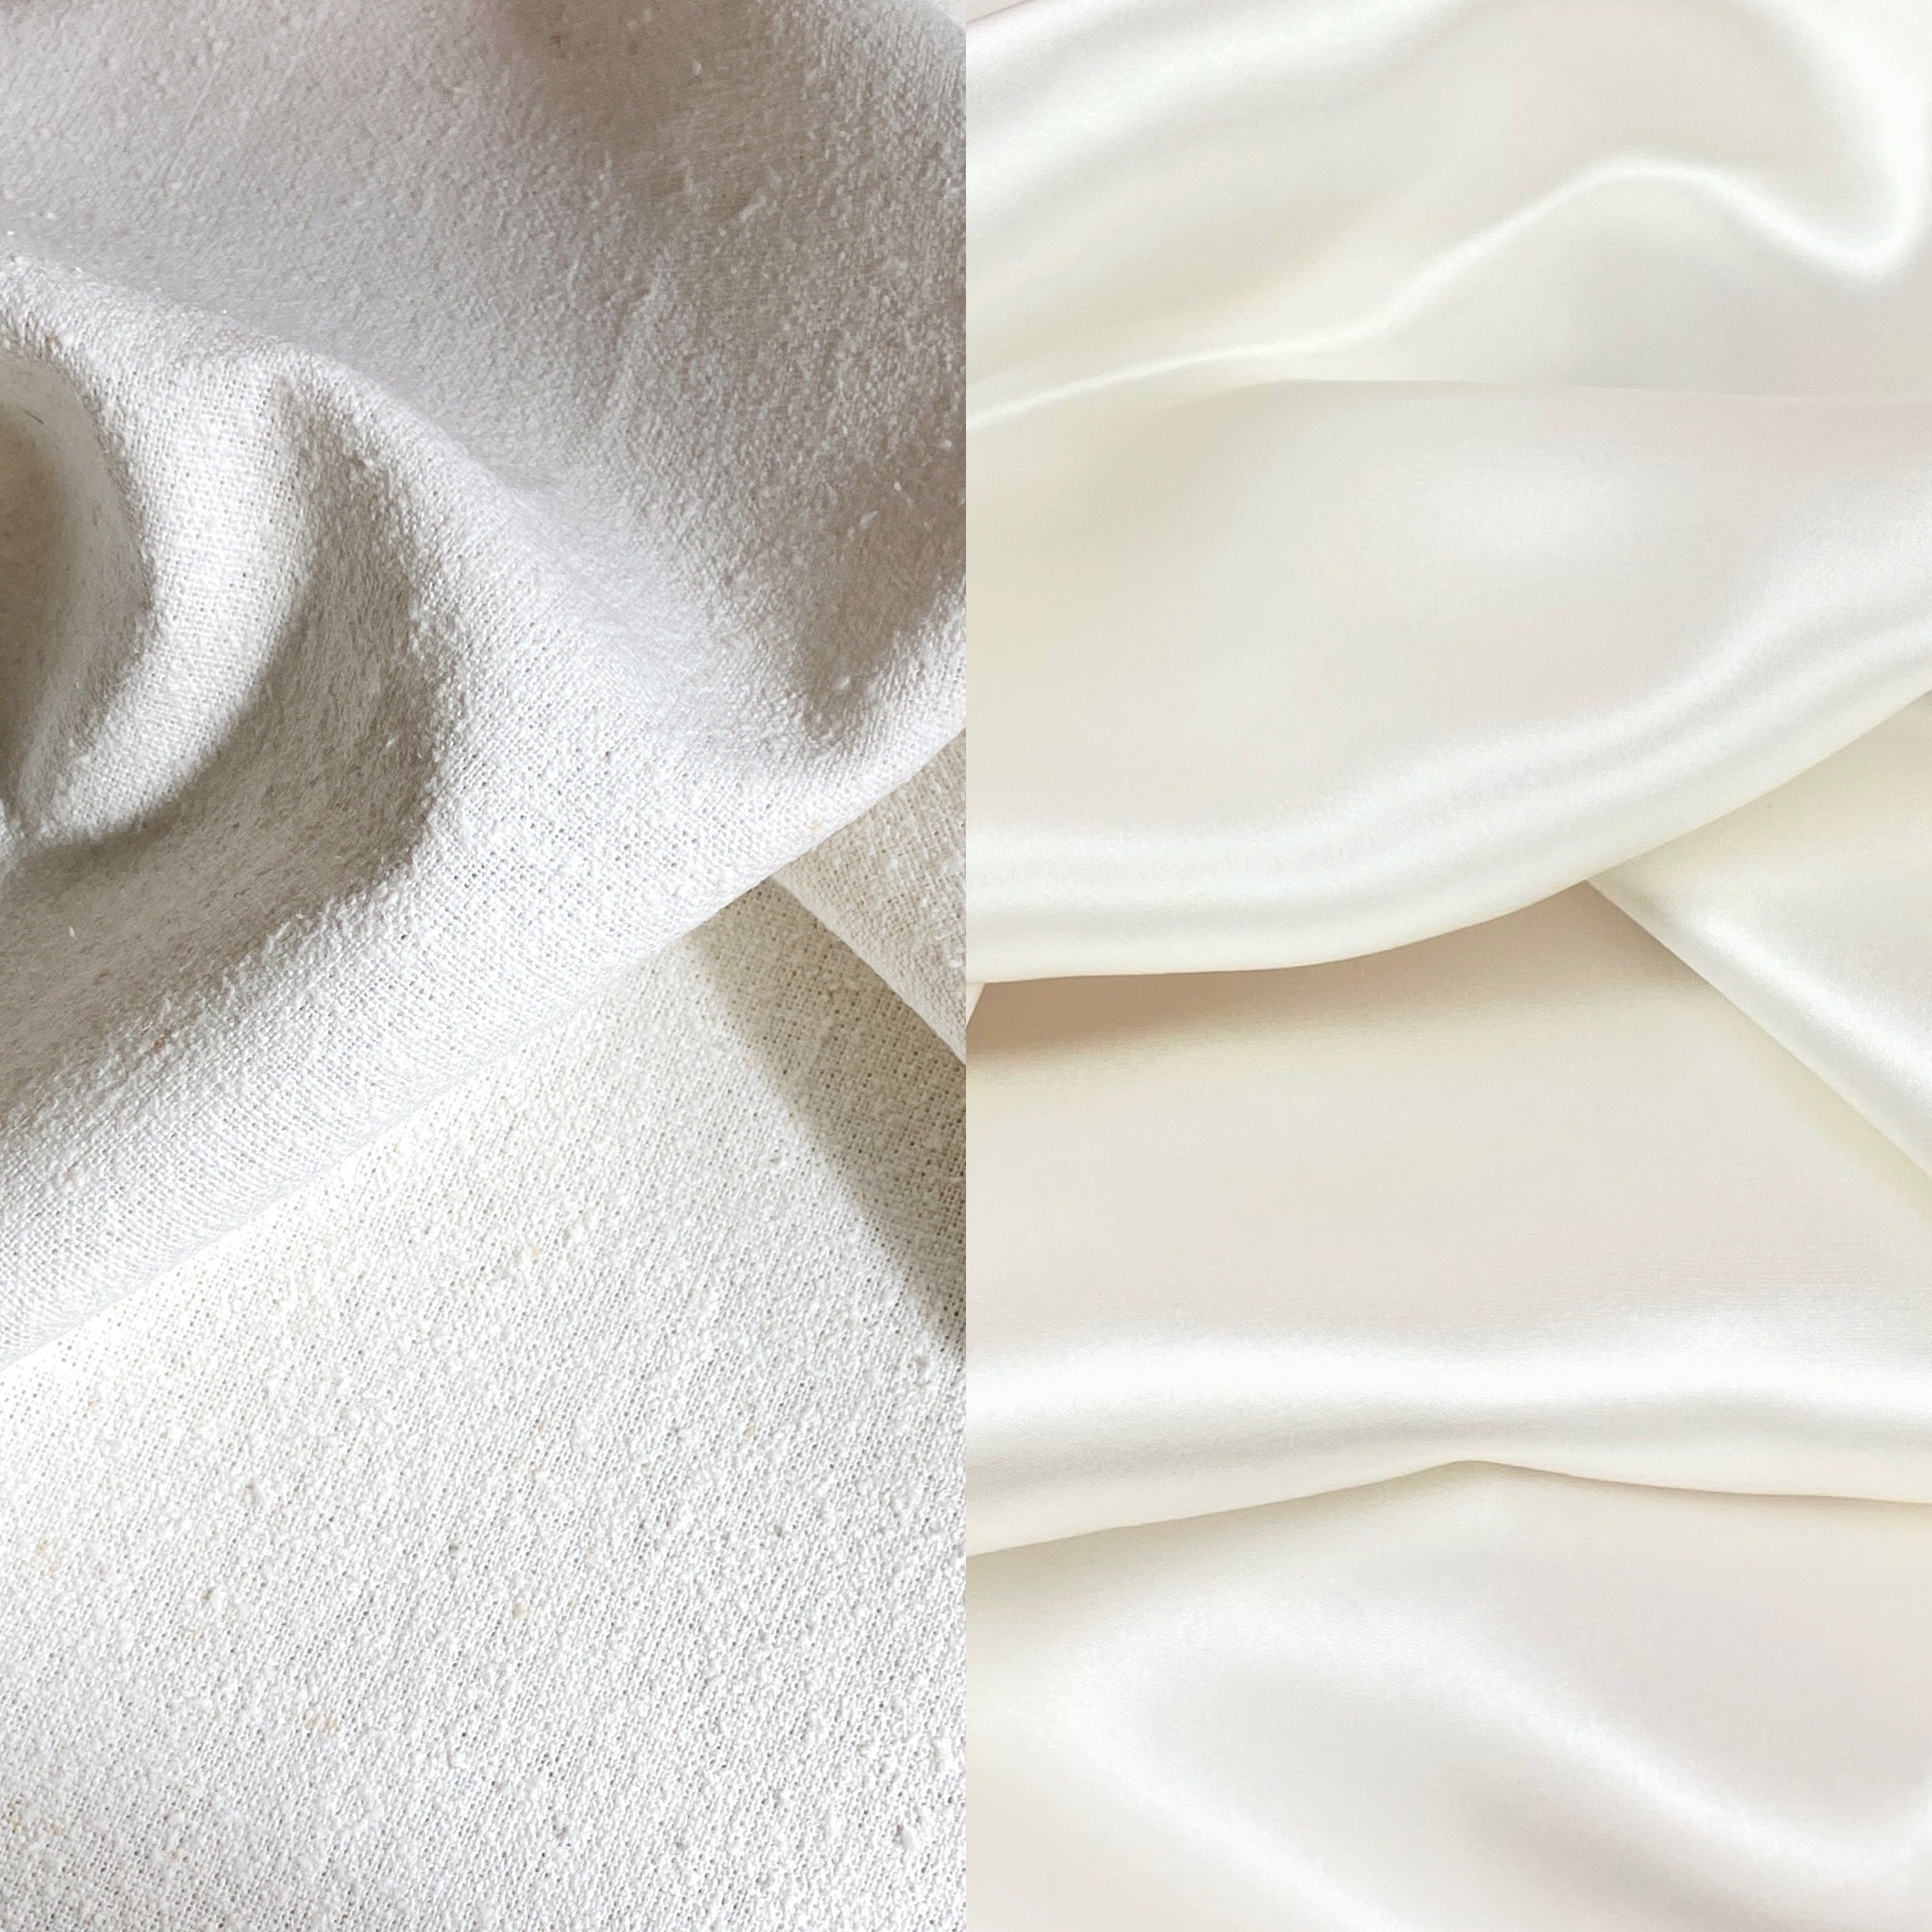 Pure Mulberry Silk vs. Pure Mulberry Silk Noil: What's the Difference?